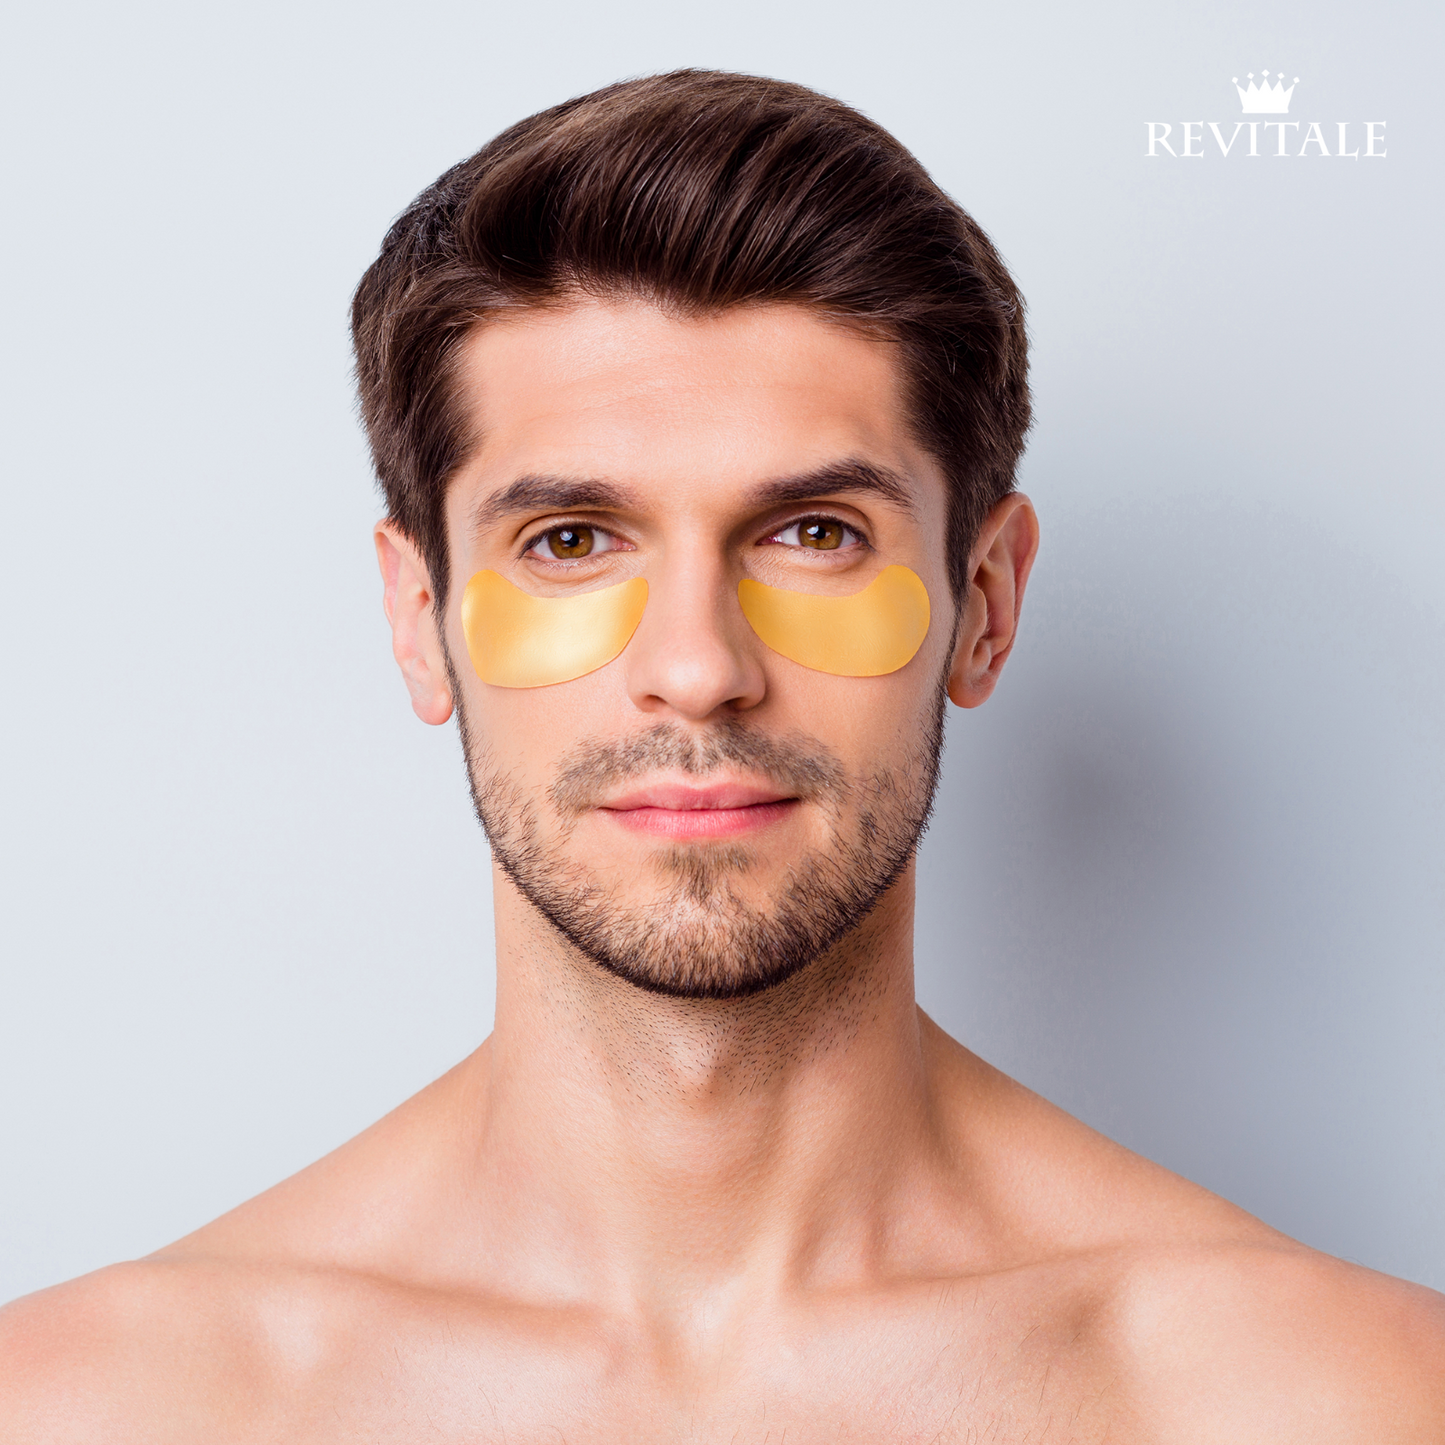 Revitale 24k Gold Under EYE Patches Collagen Gel Mask, Nourishes, Firms & Hydrates, Puffy Eyes & Dark Circles, Hyaluronic Acid (30 Pack)